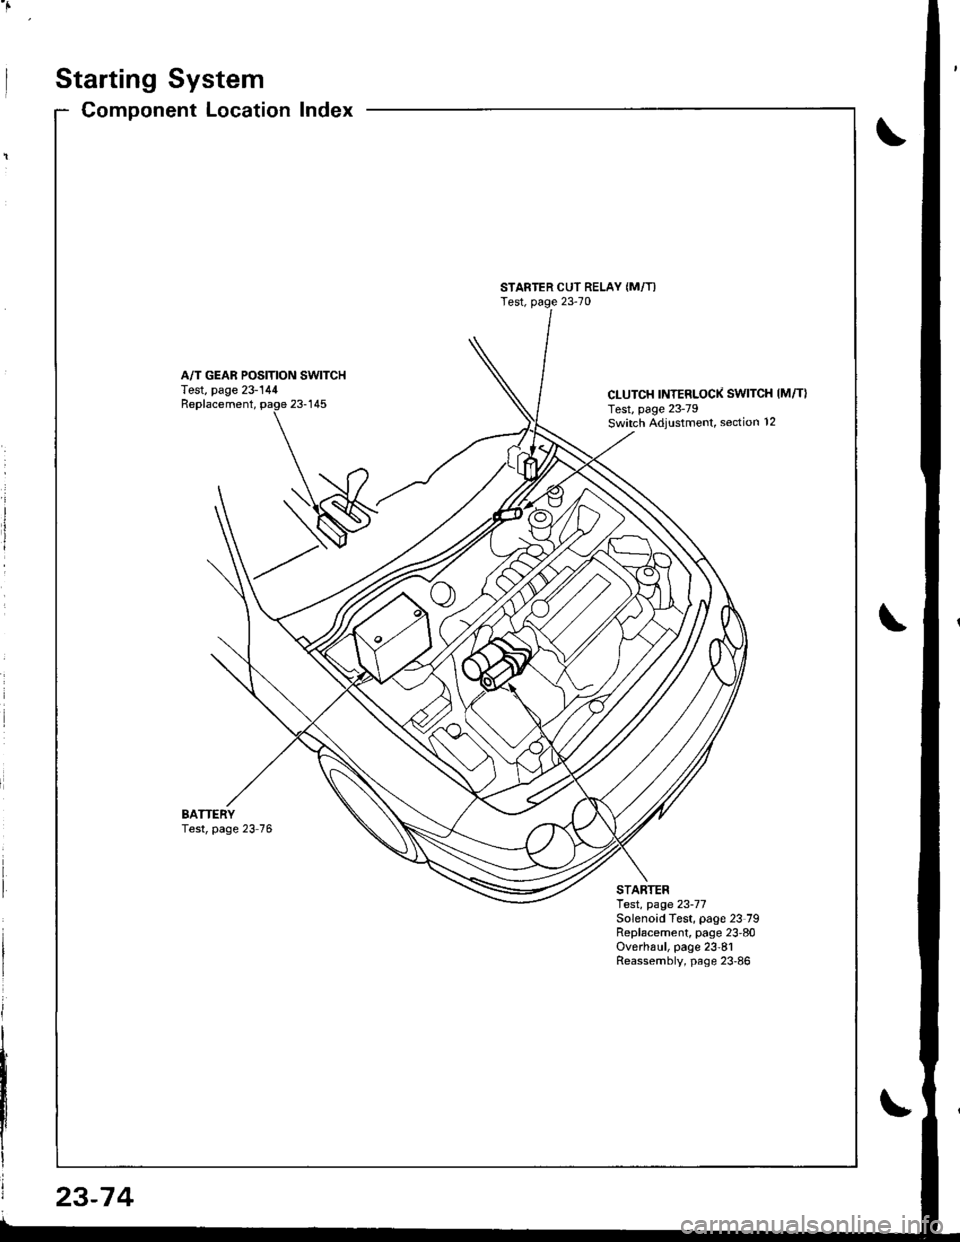 HONDA INTEGRA 1998 4.G User Guide Starting System
Component LocationIndex
STARTER CUT RELAY (M/T)
Test, page 23-70
A/T GEAR POSITION SWITCHTest, page 23-144CLUTCH INTERLOCK SWITCH IM/T}Test, page 23-79Switch ,Adiustment, section 12
Re